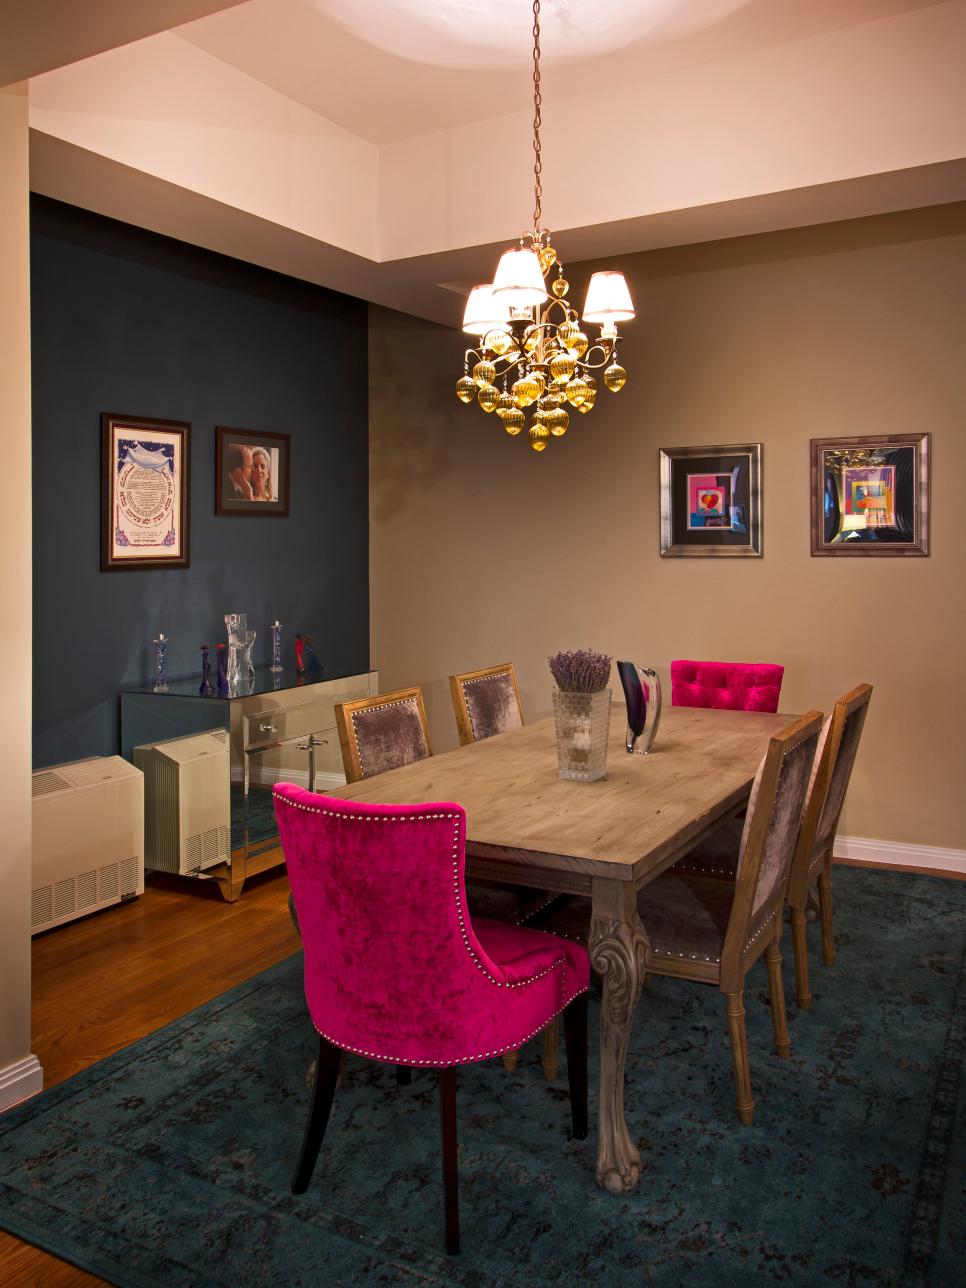 Glamorous Dining Room With Fuchsia Dining Chairs | HGTV